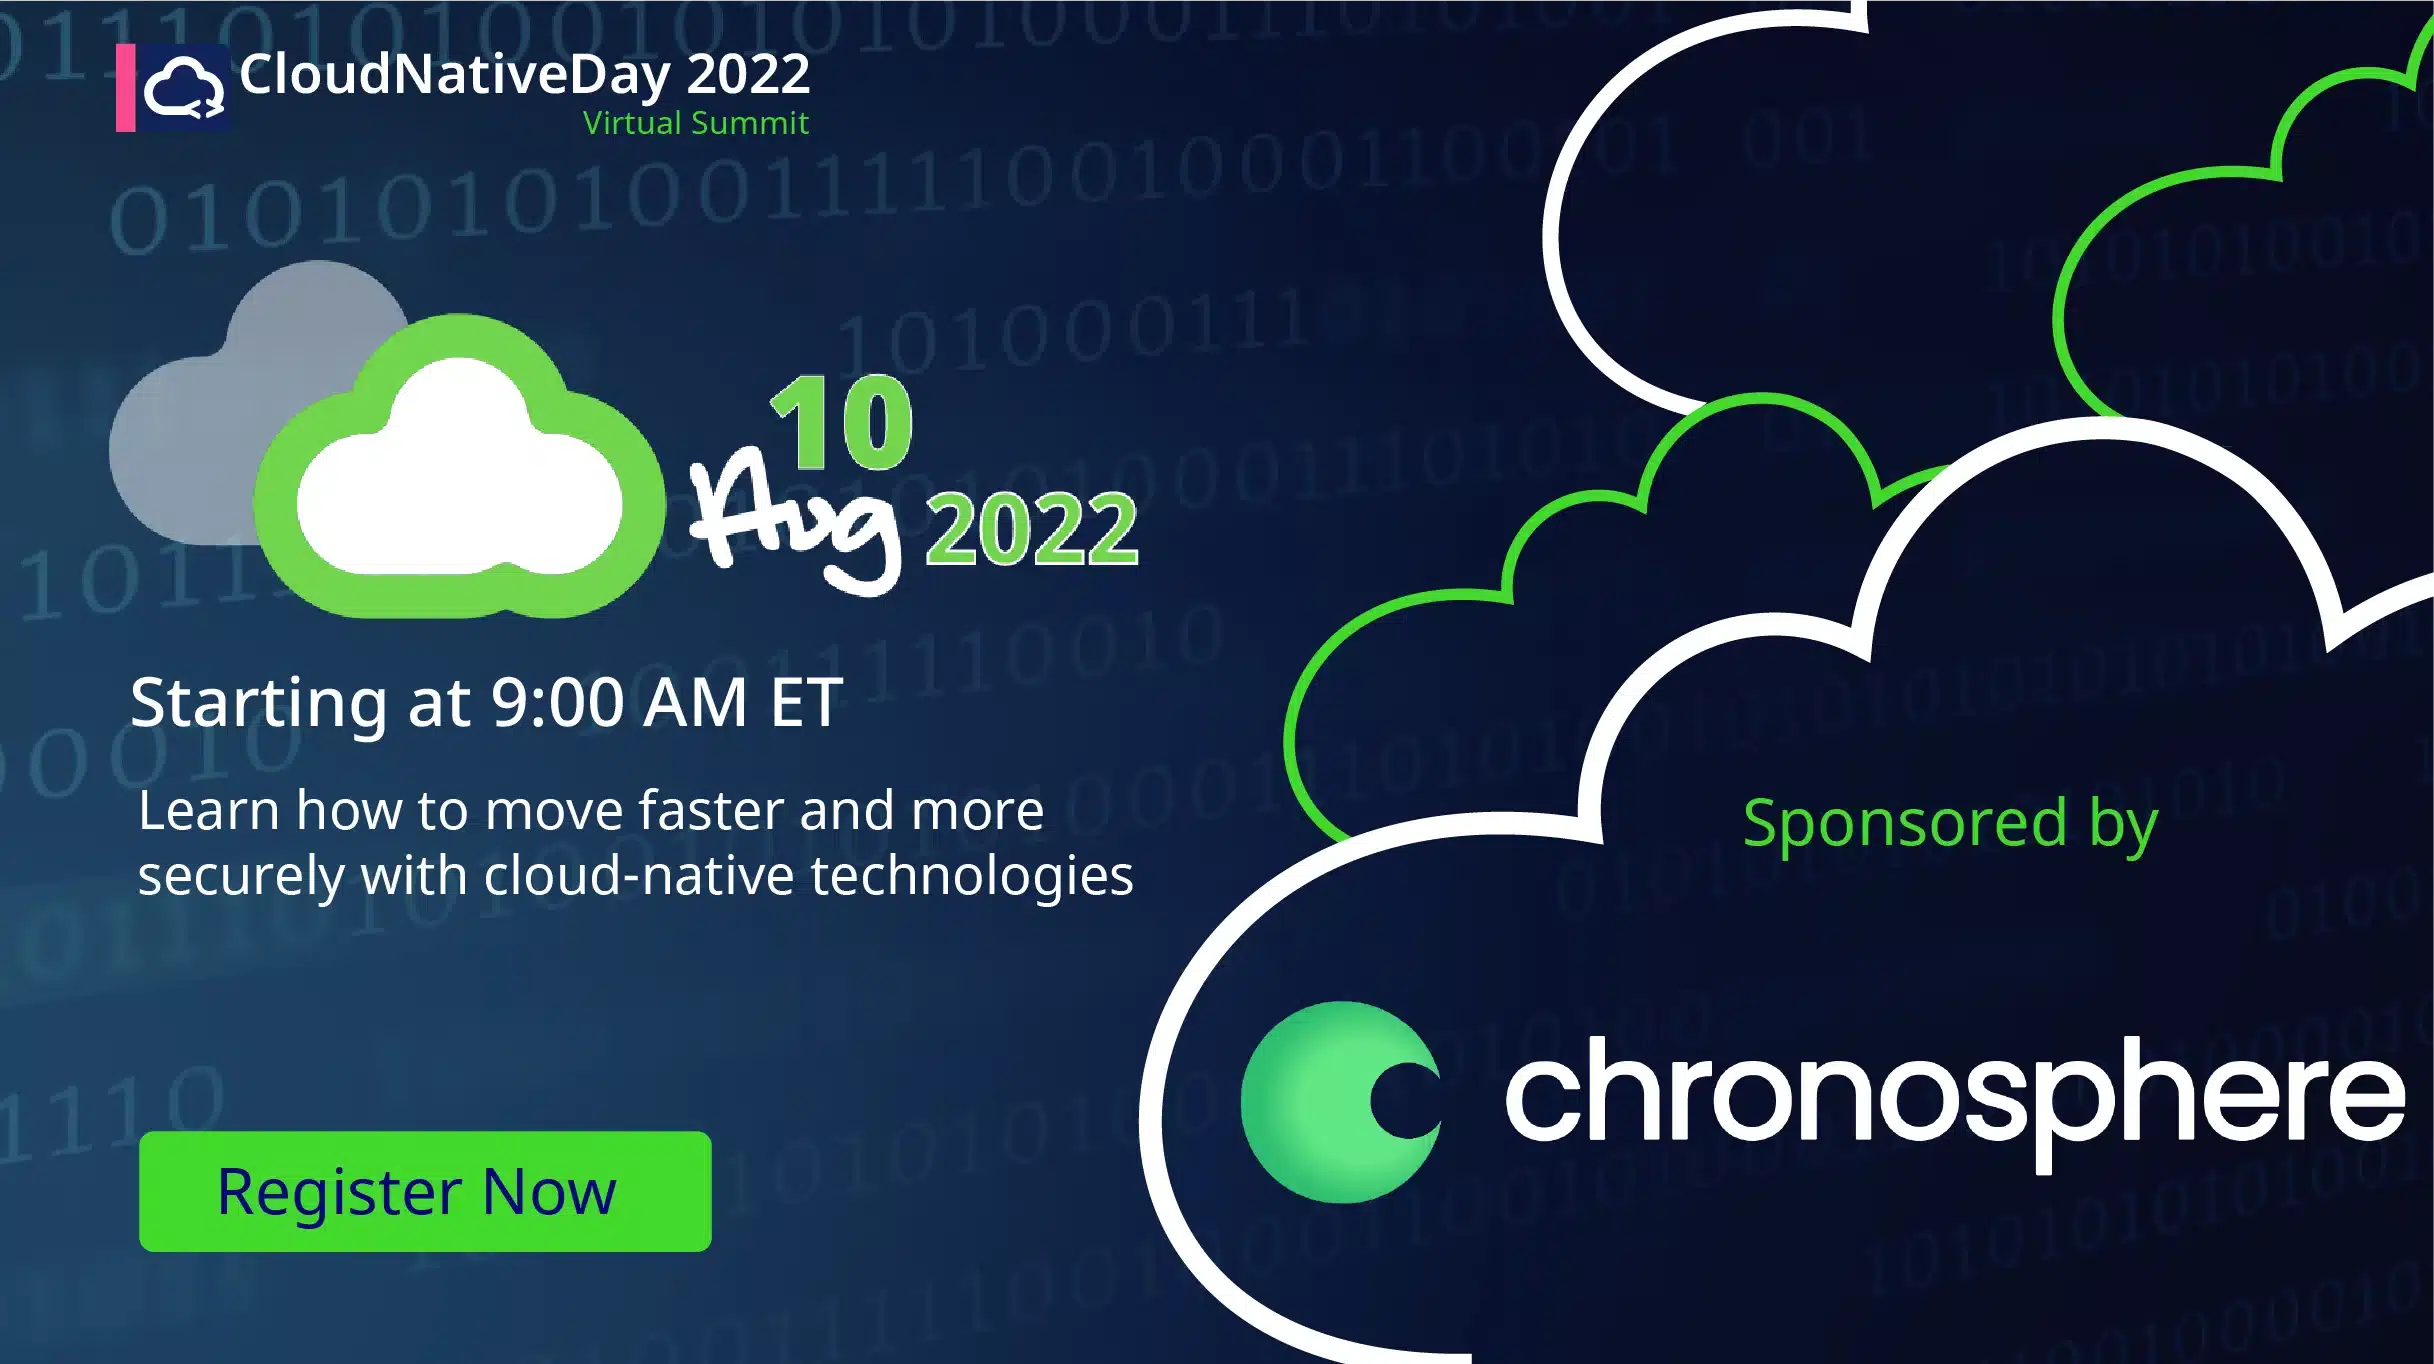 A cloud featuring the word "Chronosphere" during the Cloud Native Day Virtual Summit.